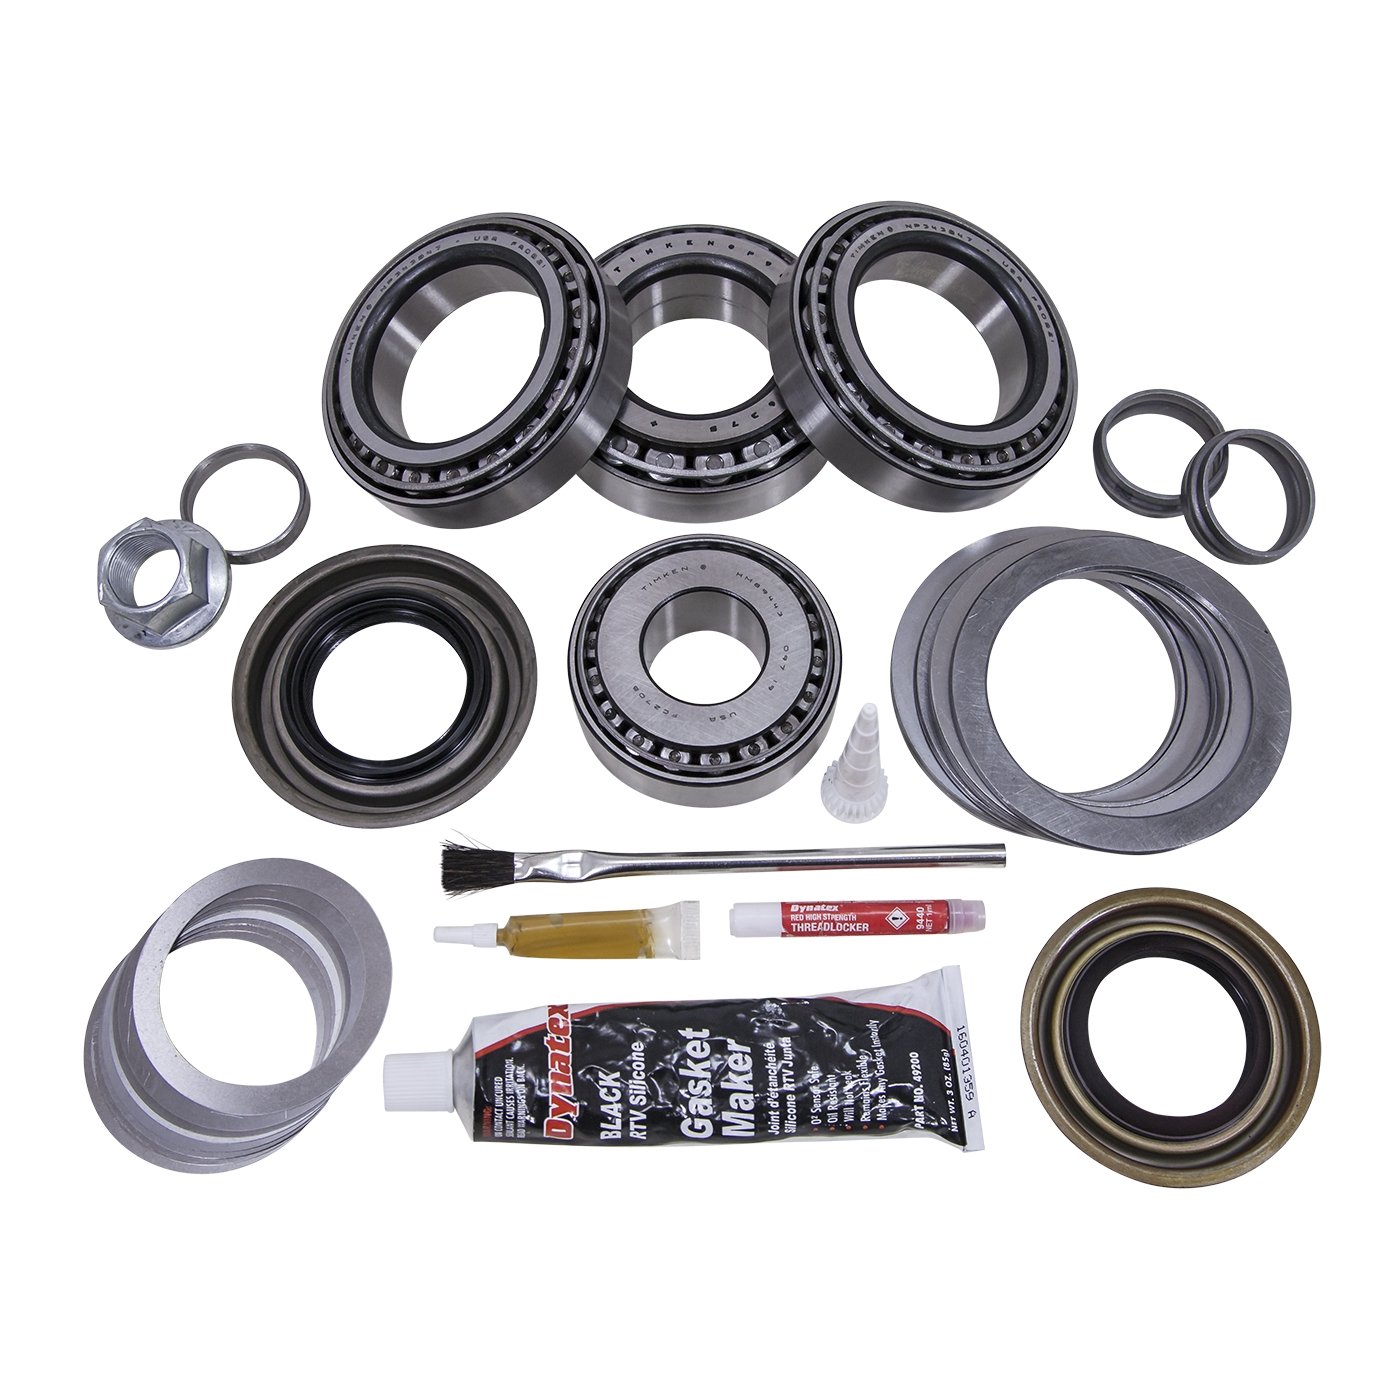 USA Standard ZK F9.75-B Master Overhaul Kit, For The '00-'10 Ford 9.75 in. Differential